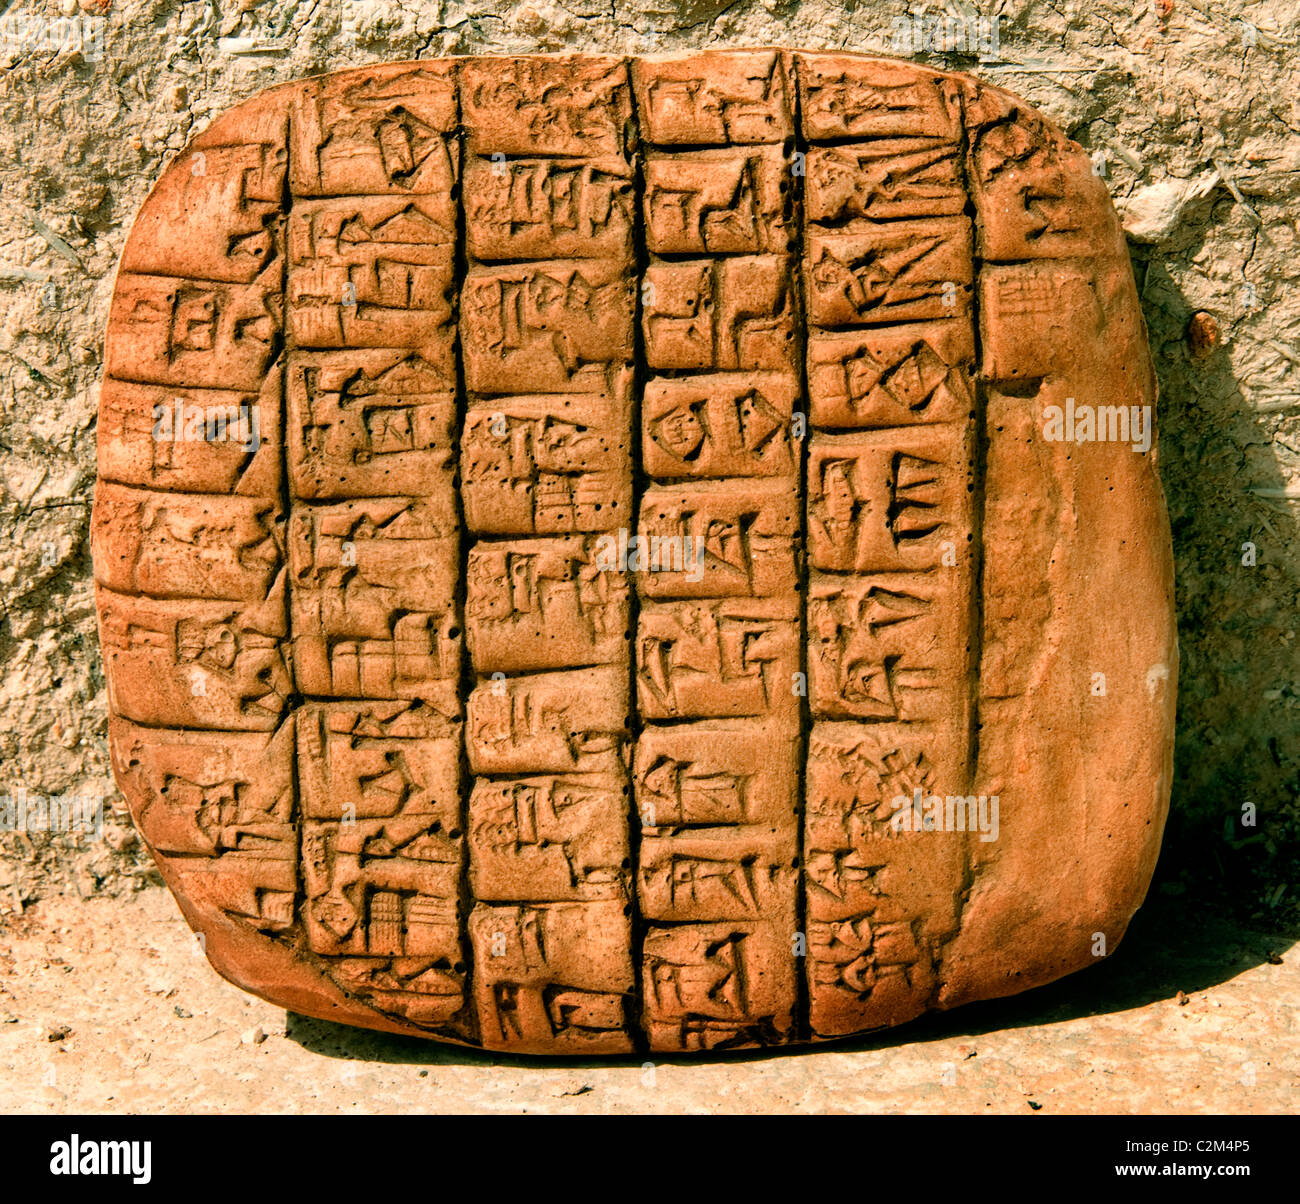 New copy Tablet Ebla Syria Aleppo 3000 BC - 1650 BC 20,000 cuneiform tablets found there Semitic language related Akkadian Stock Photo